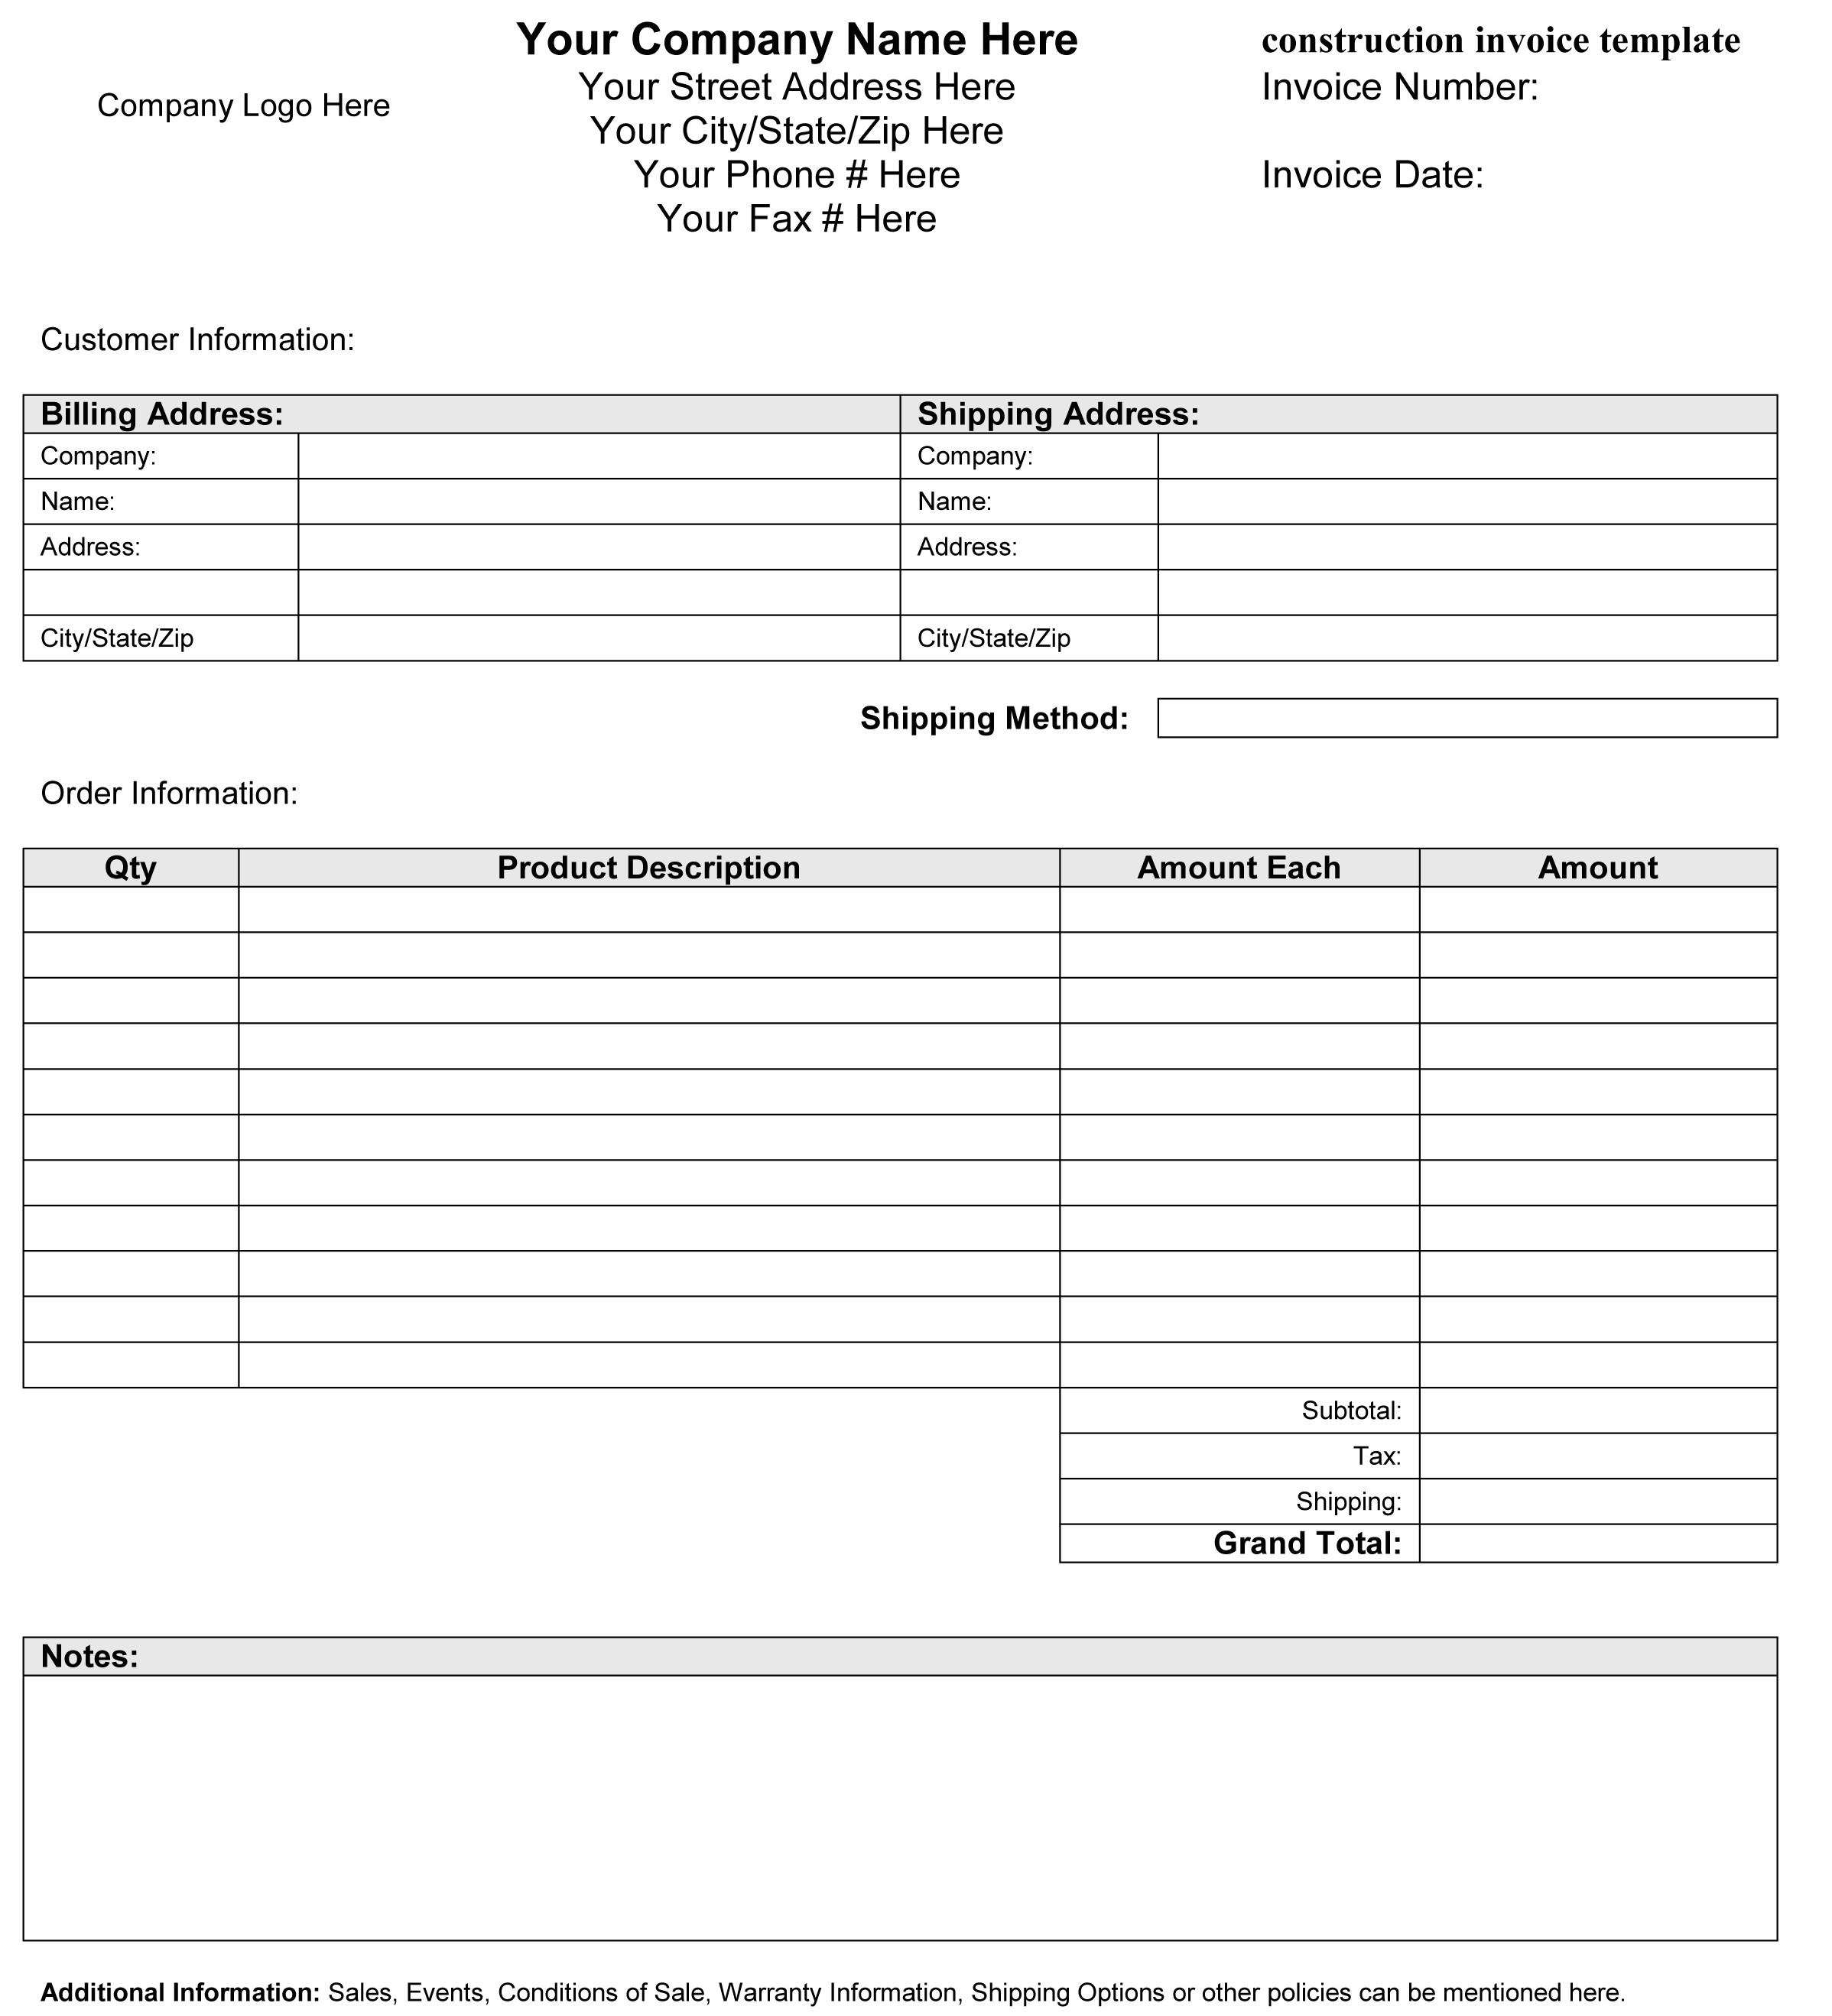 construction invoice template 1770